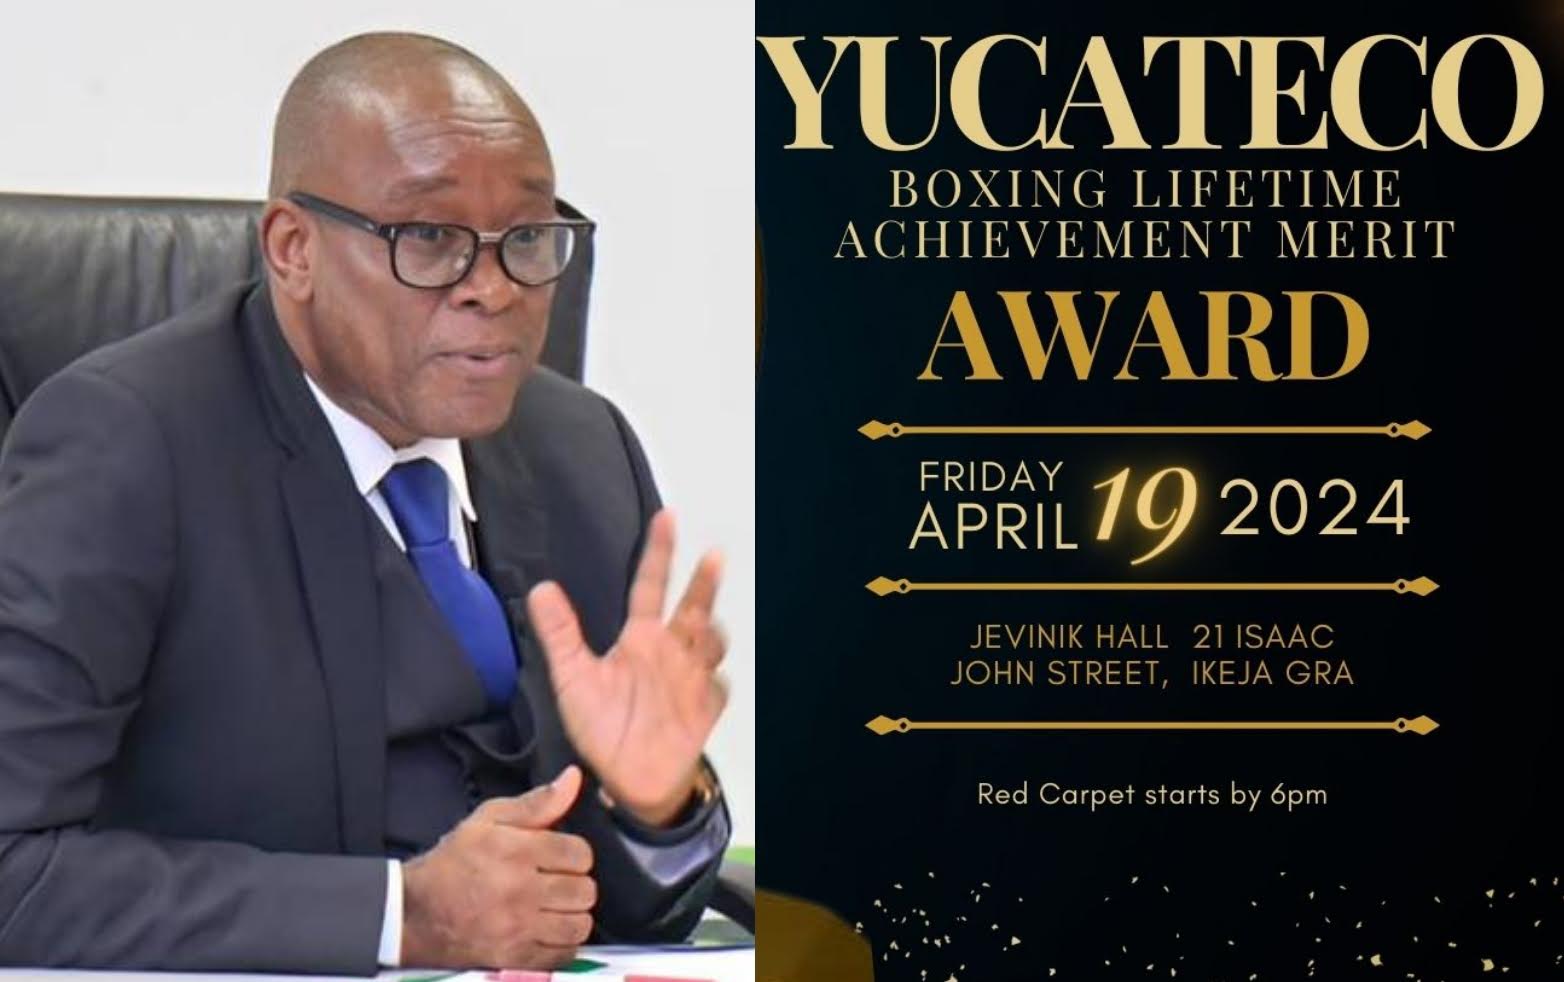 Enoh To Grace Sports Ministry / Yucateco Boxing Award als hoofdgastheer